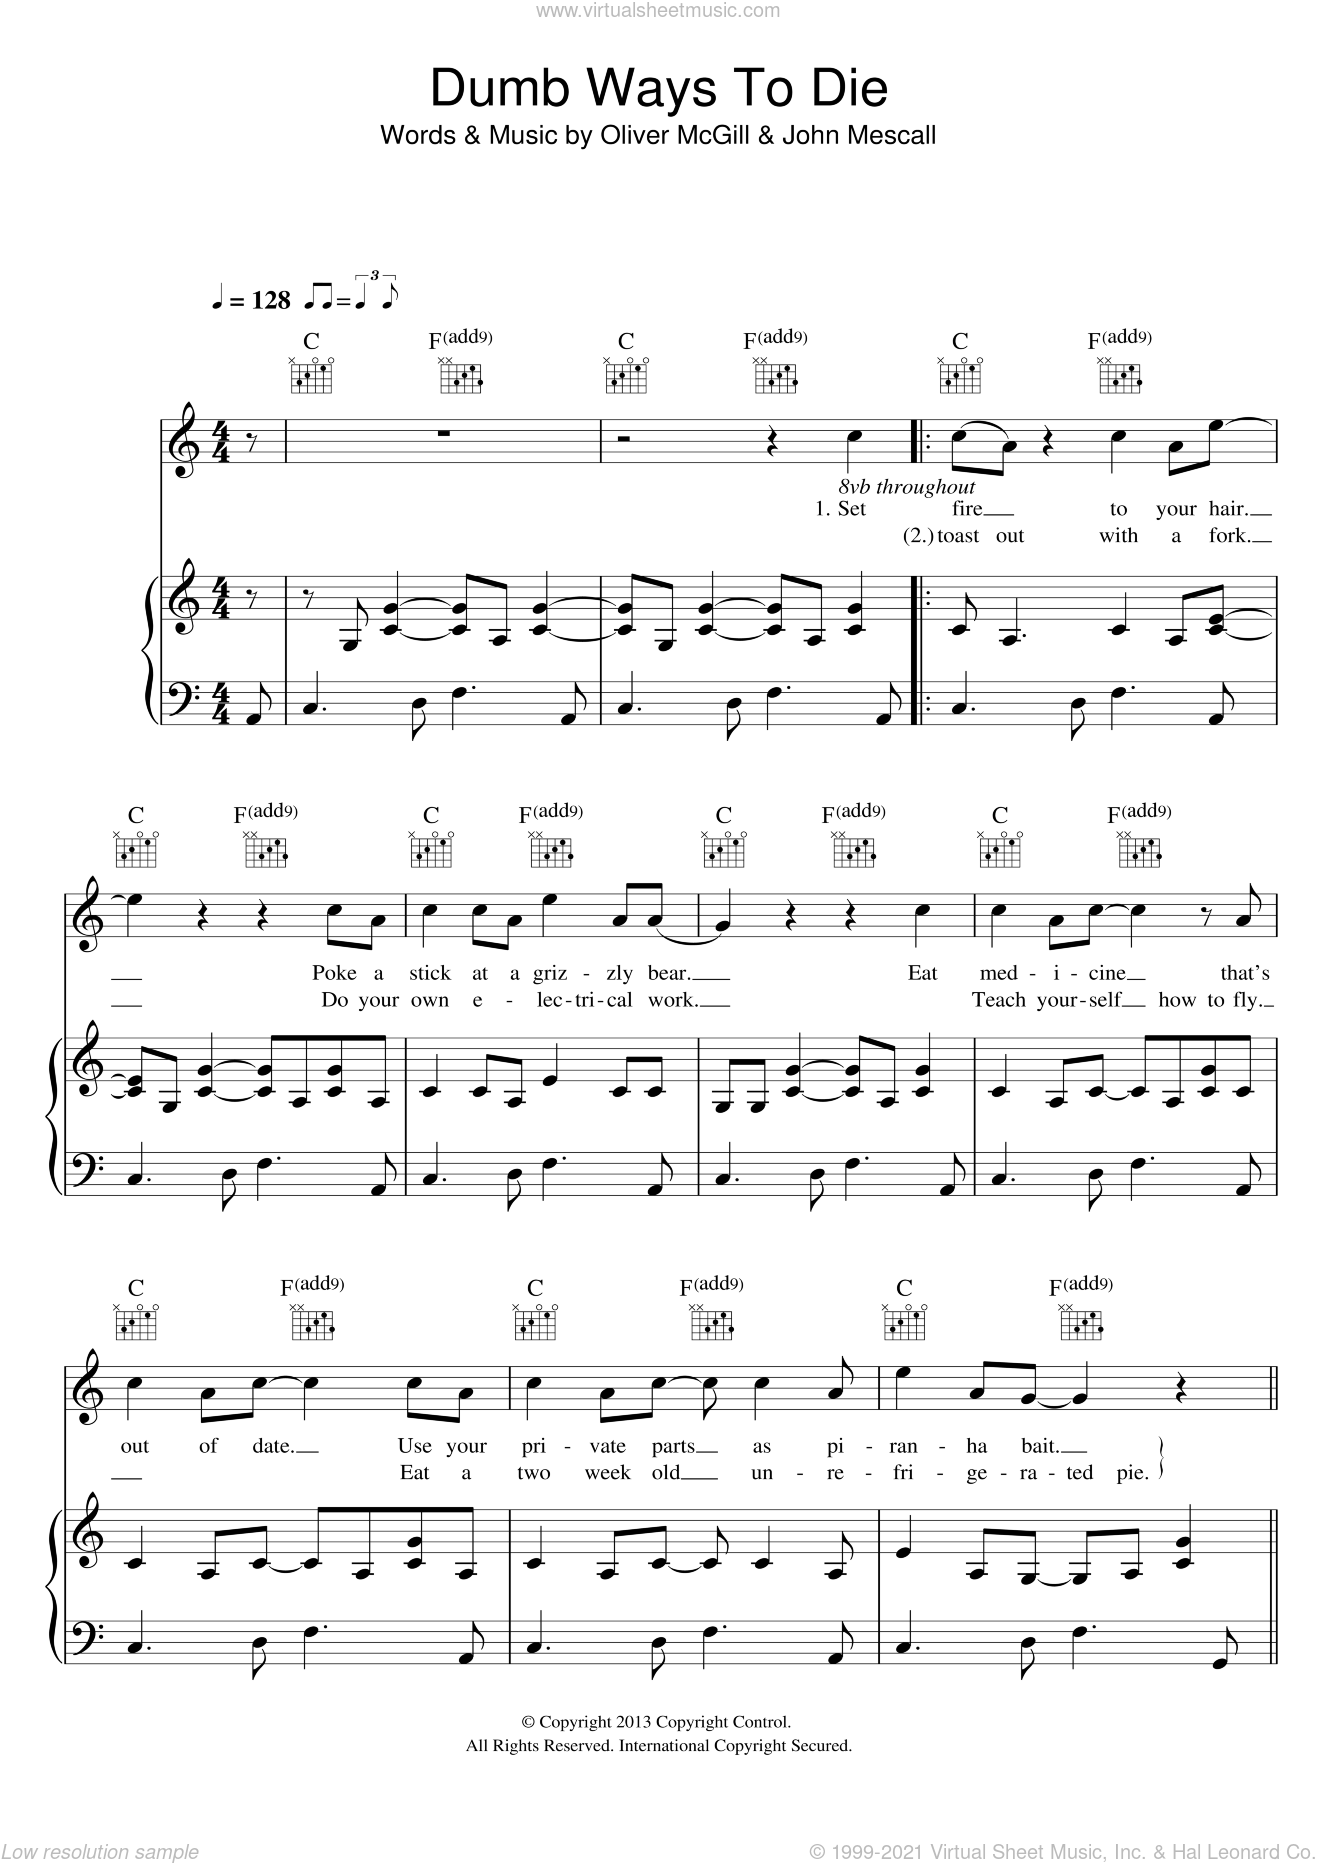 Kitty Dumb Ways To Die Sheet Music For Voice Piano Or Guitar